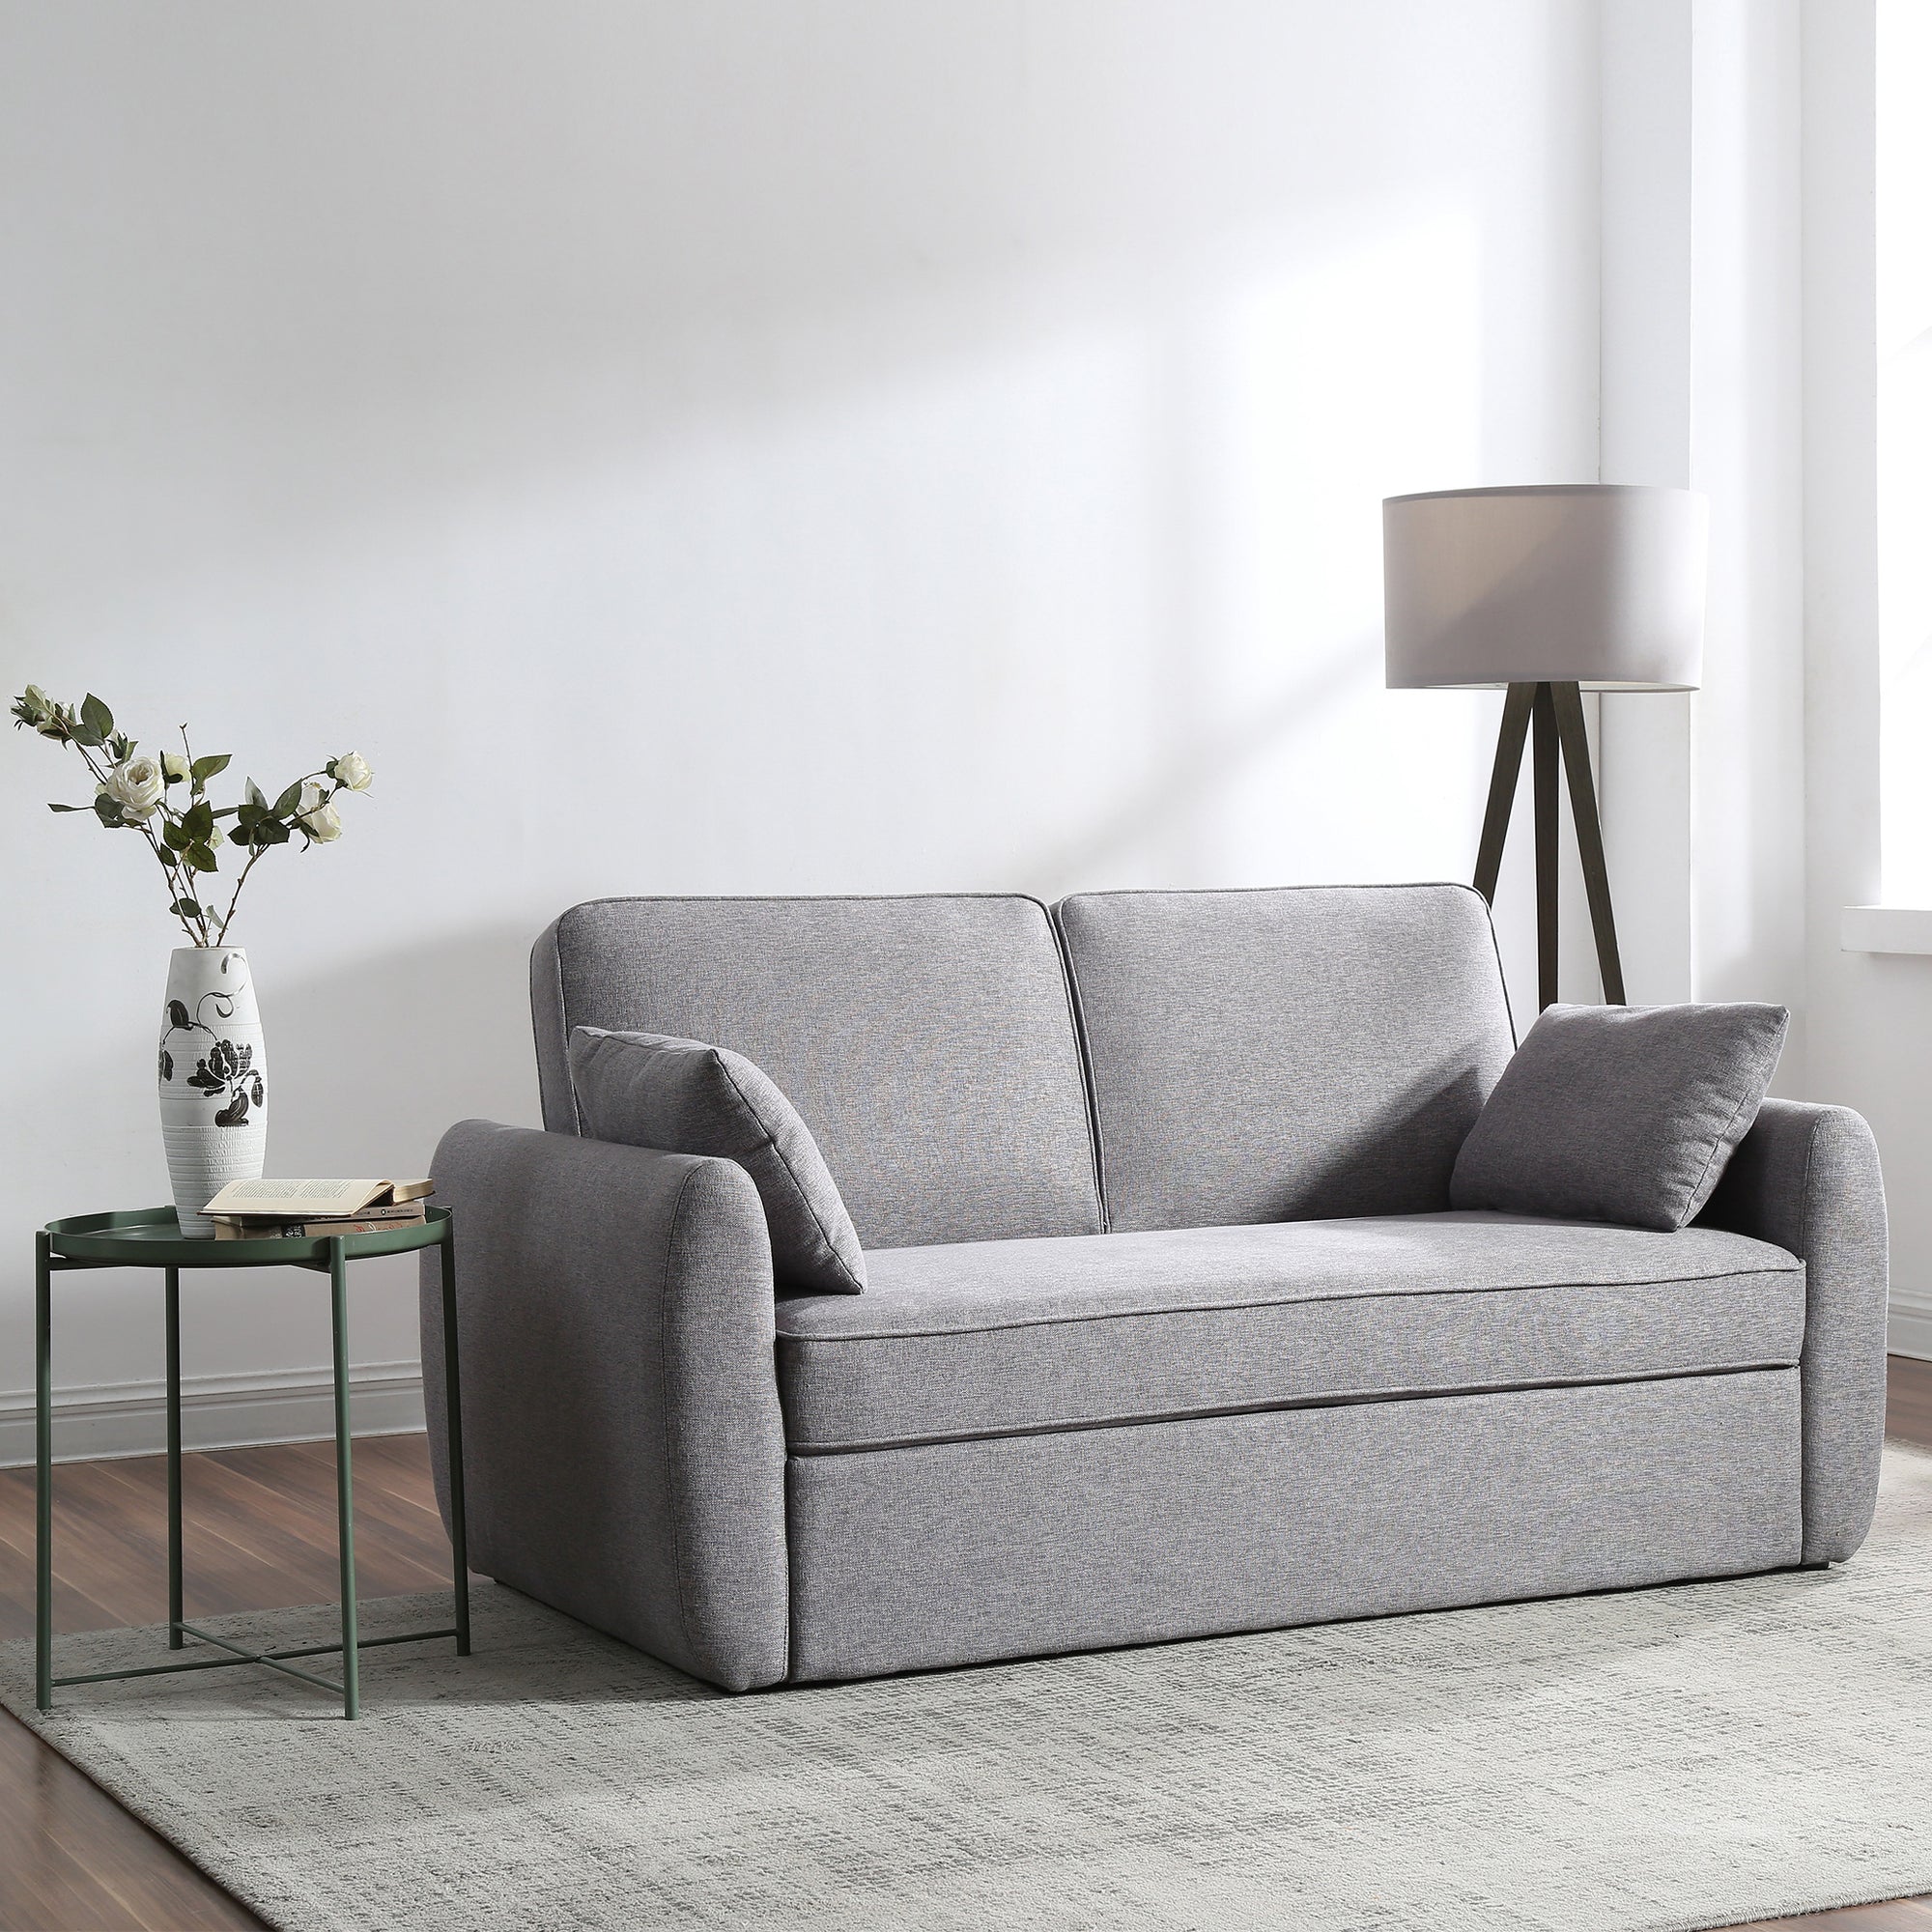 Naomi Grey 2 Seater Pop Up Sofa Bed for Living Room | Roseland ...